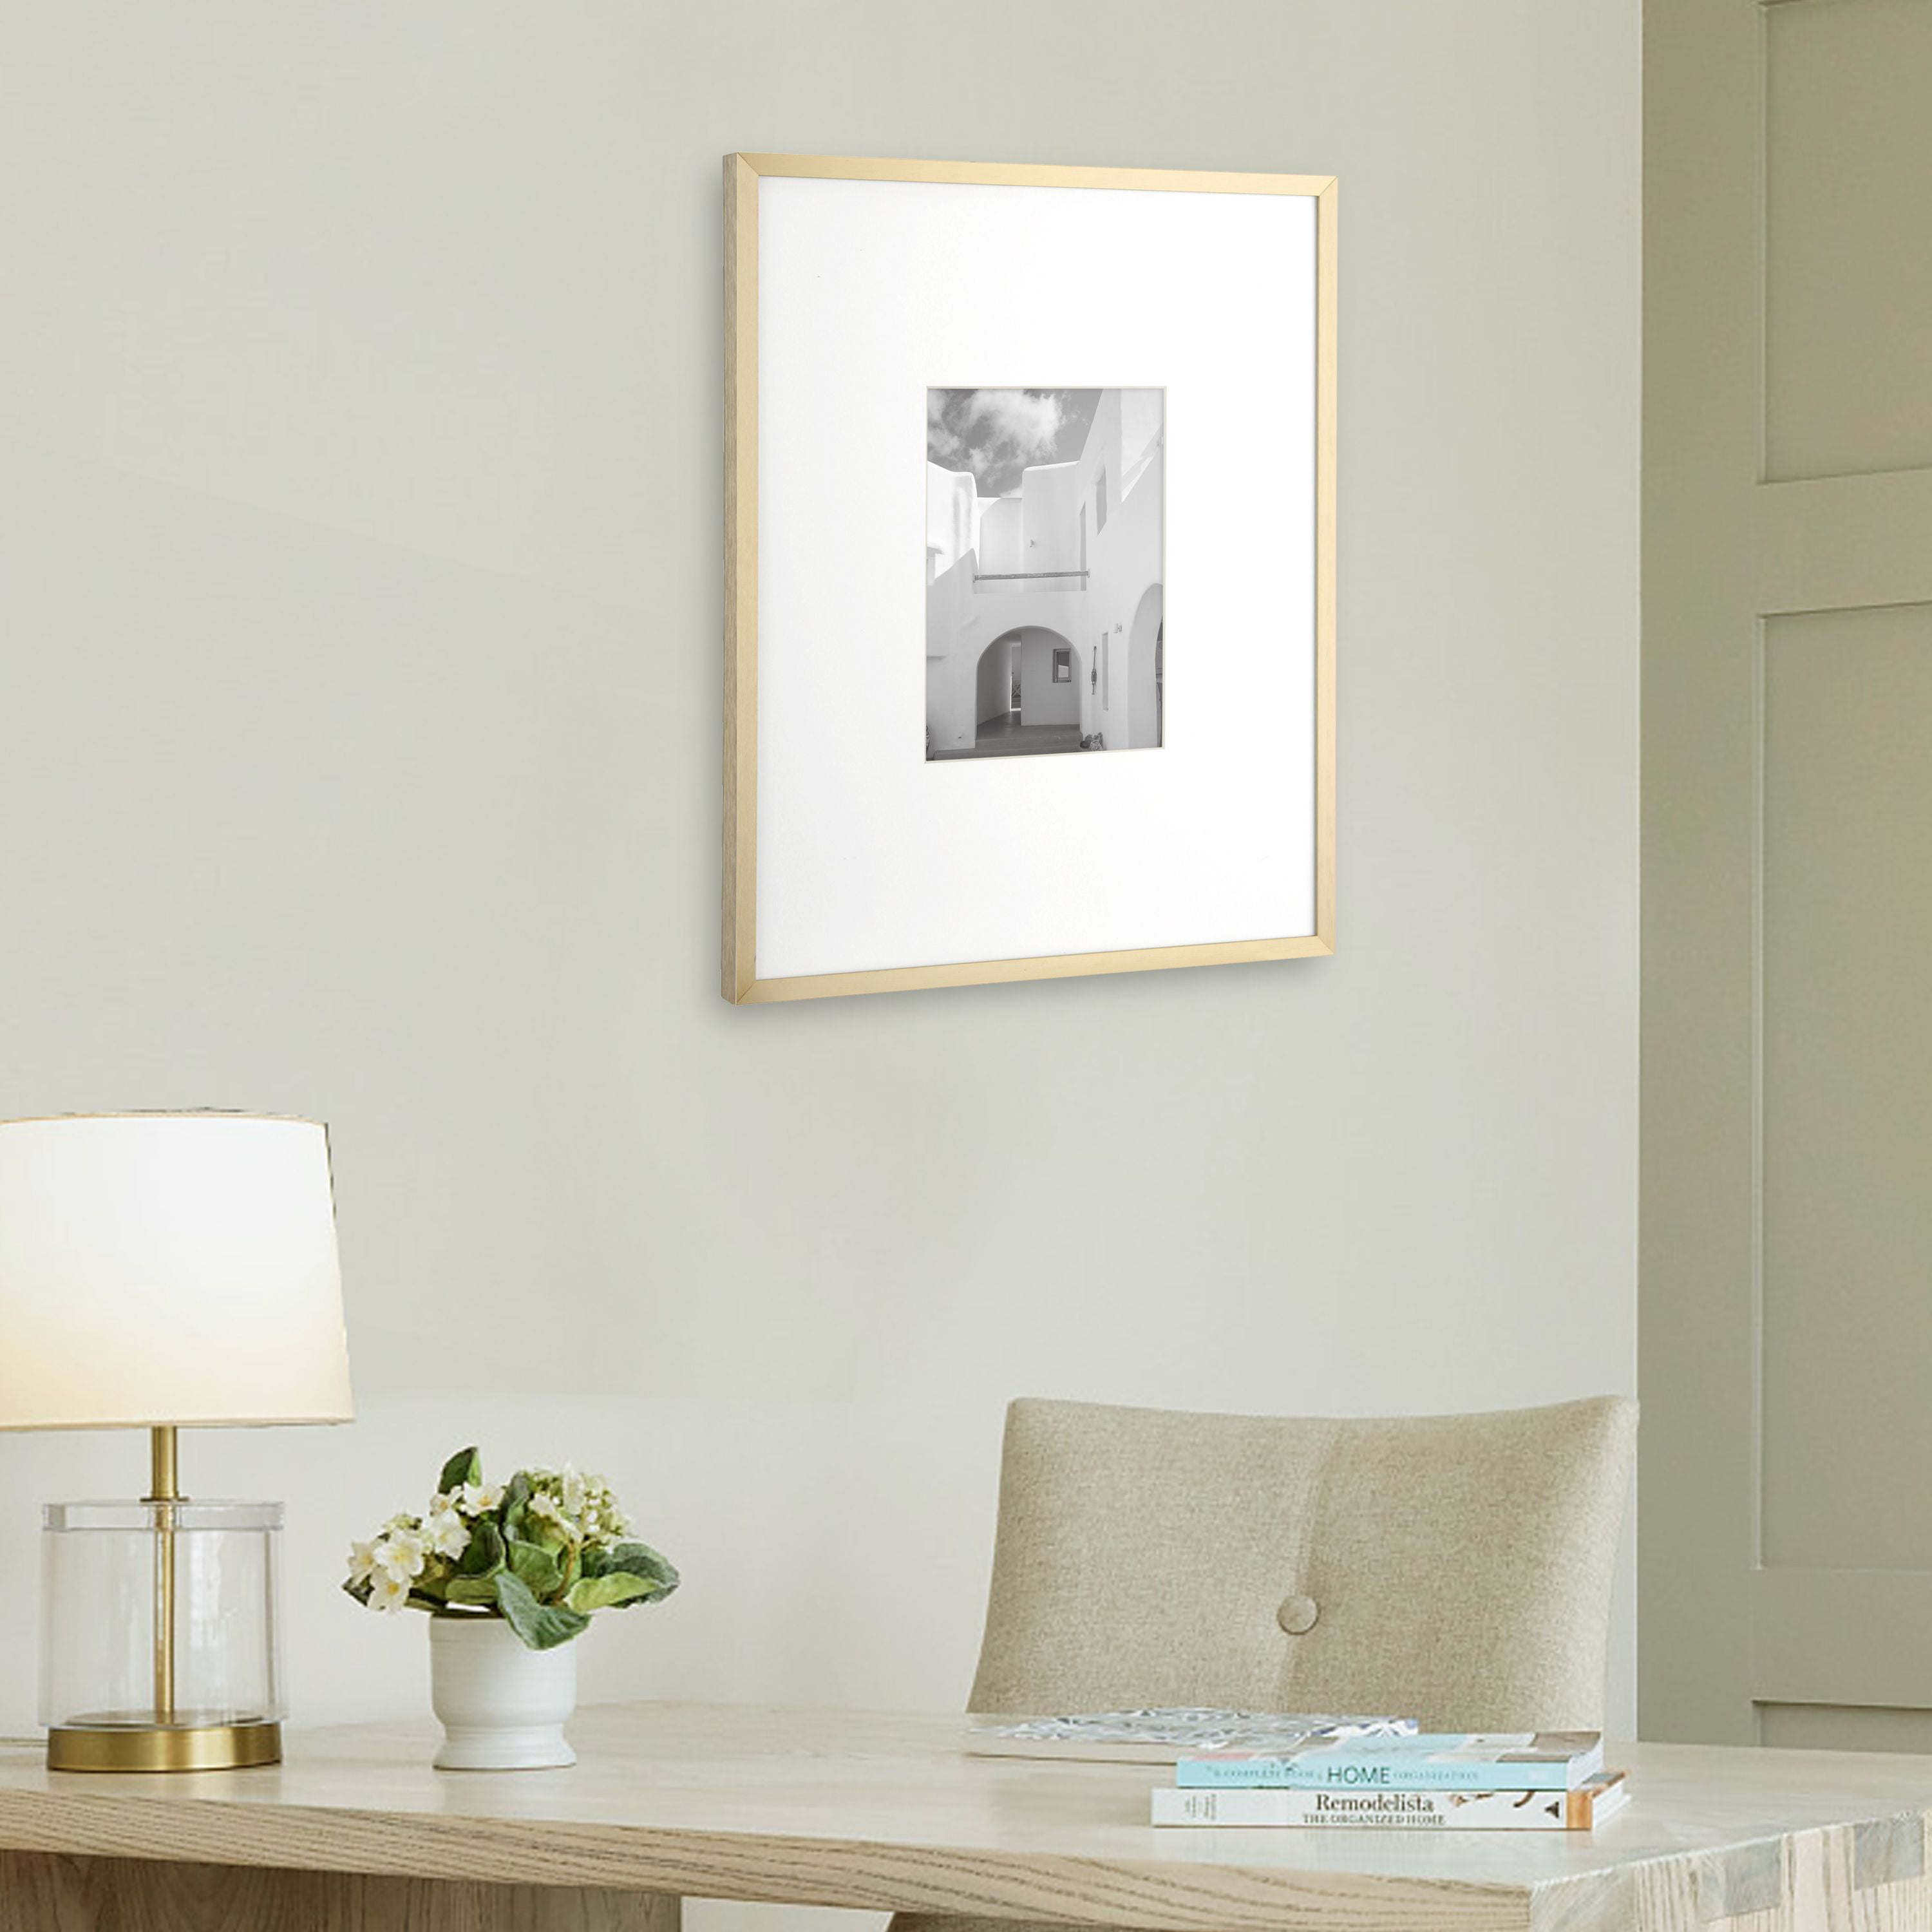 Better Homes & Gardens 18x18 Matted 5x7 Metal Gallery Wall Picture Frame,  Gold 